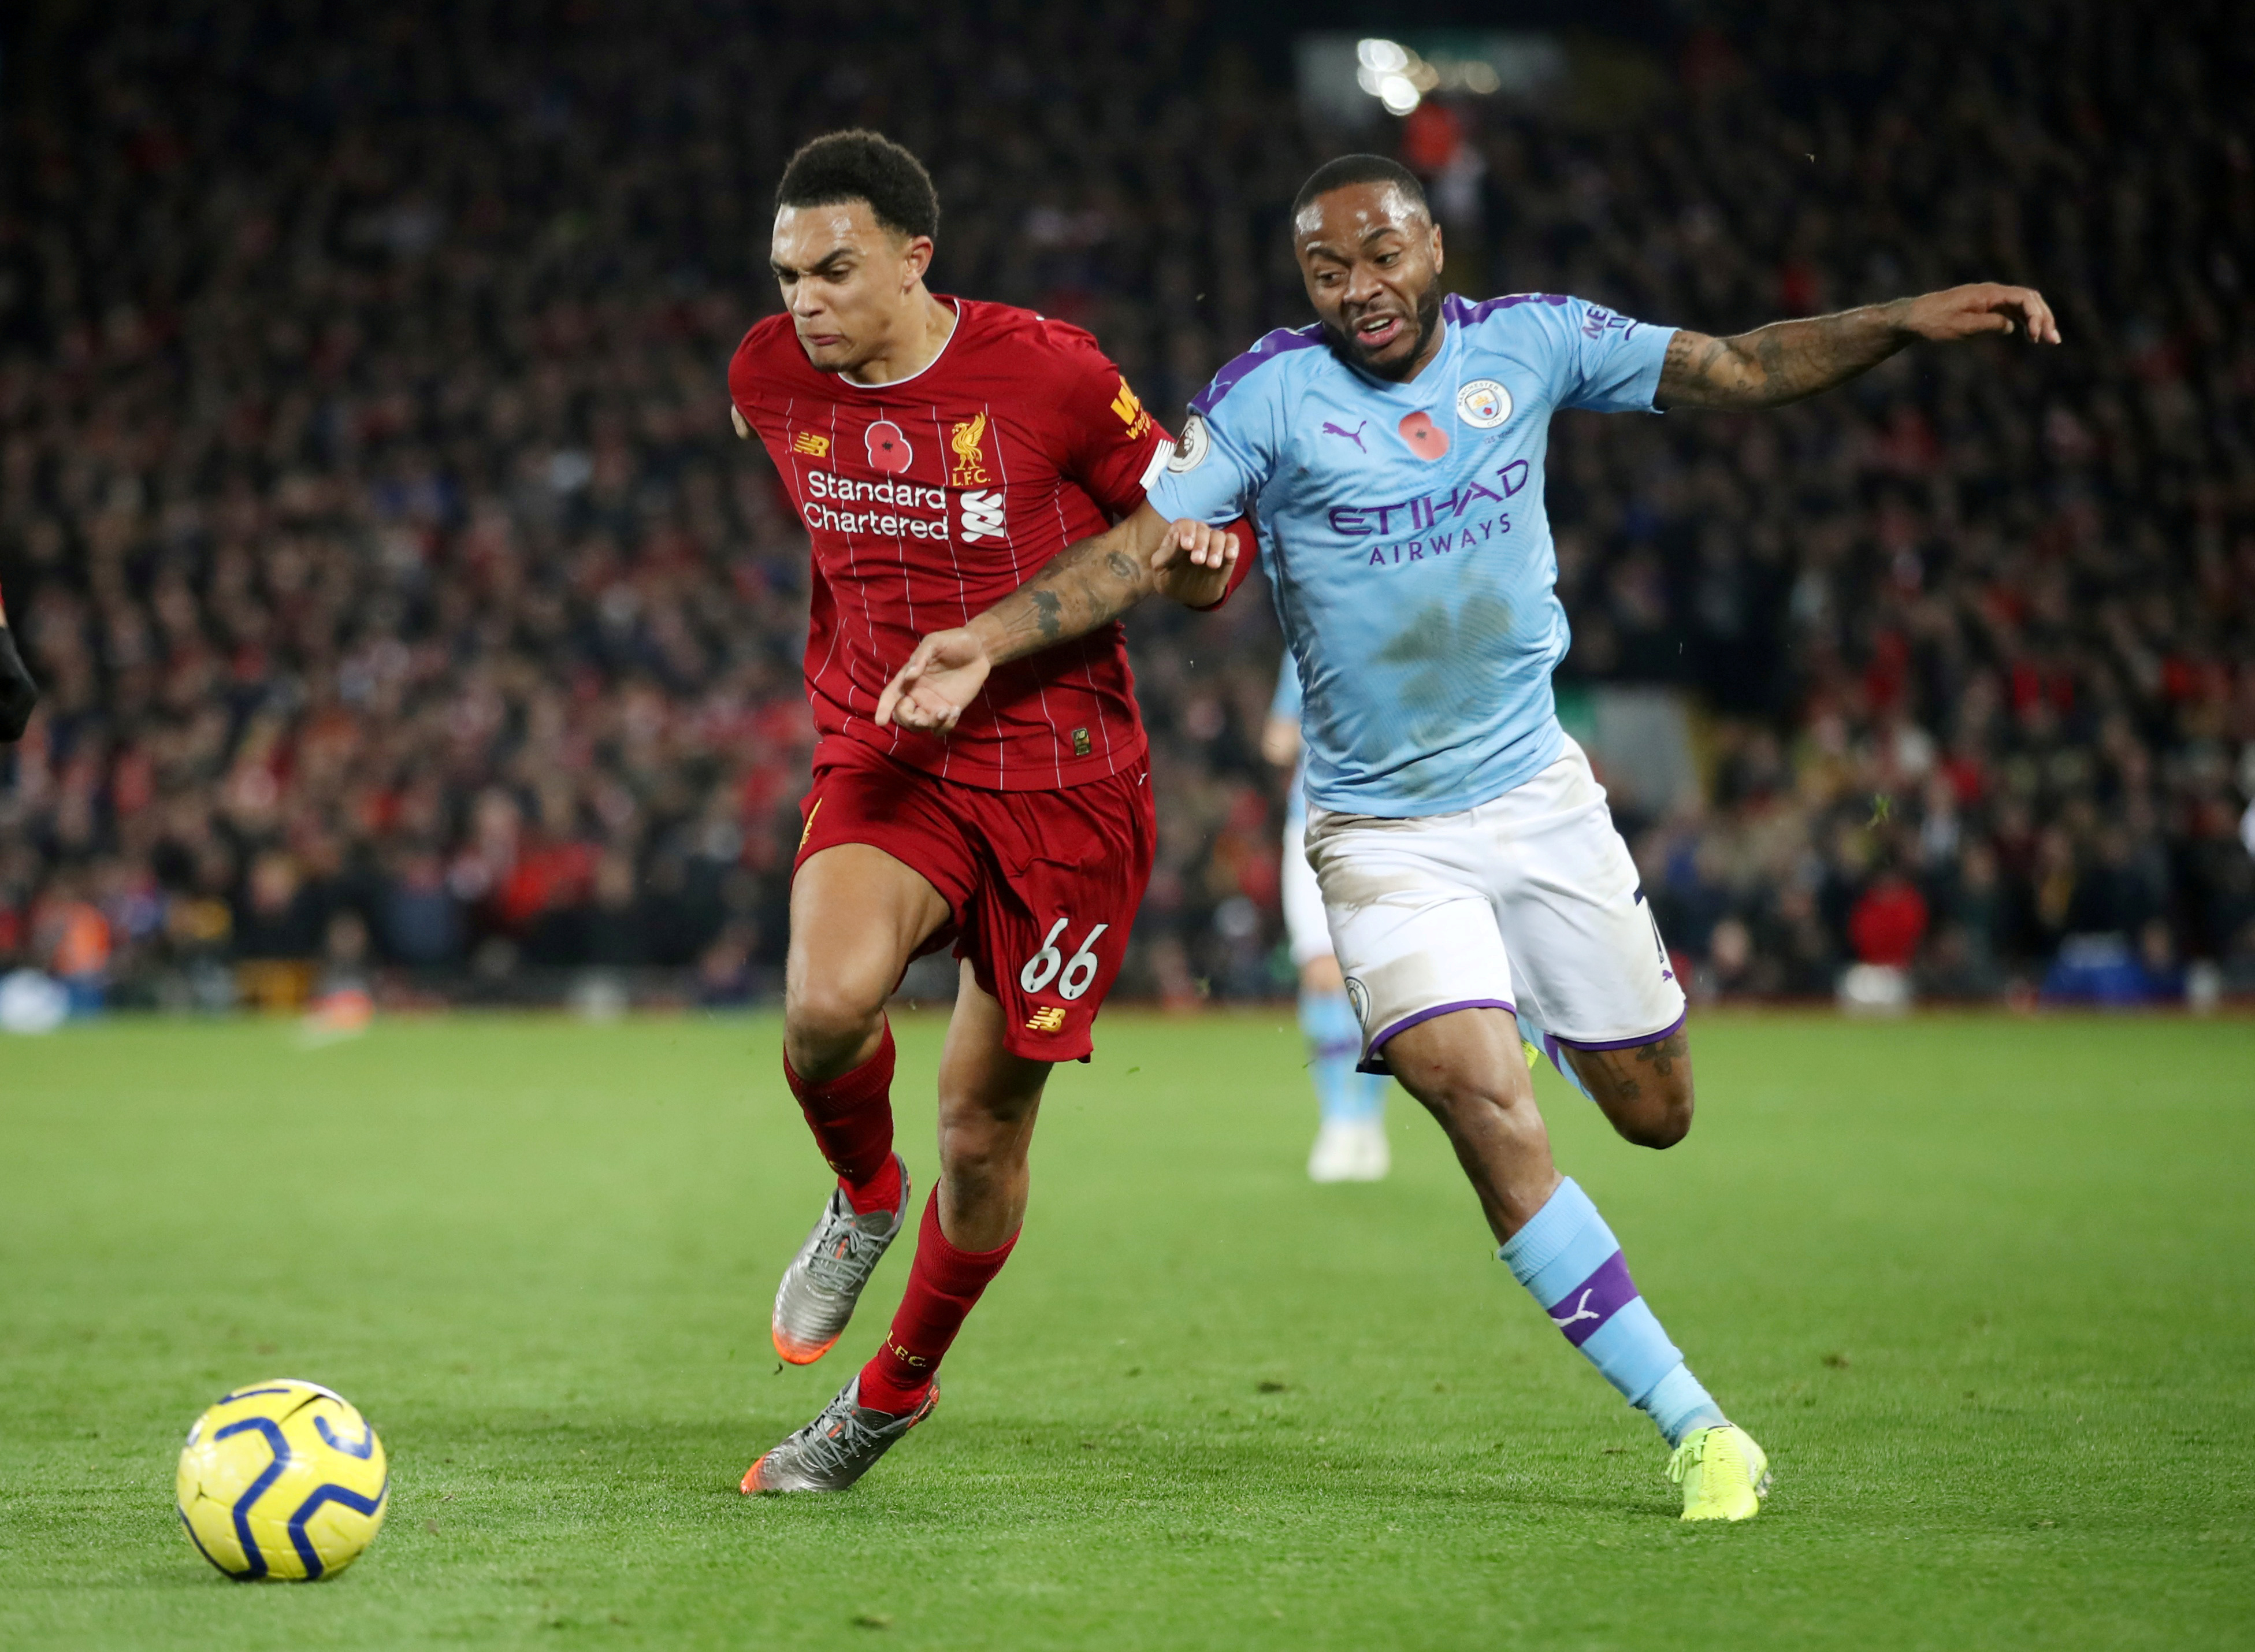 The 2019 clash between Liverpool and Man City tops the list